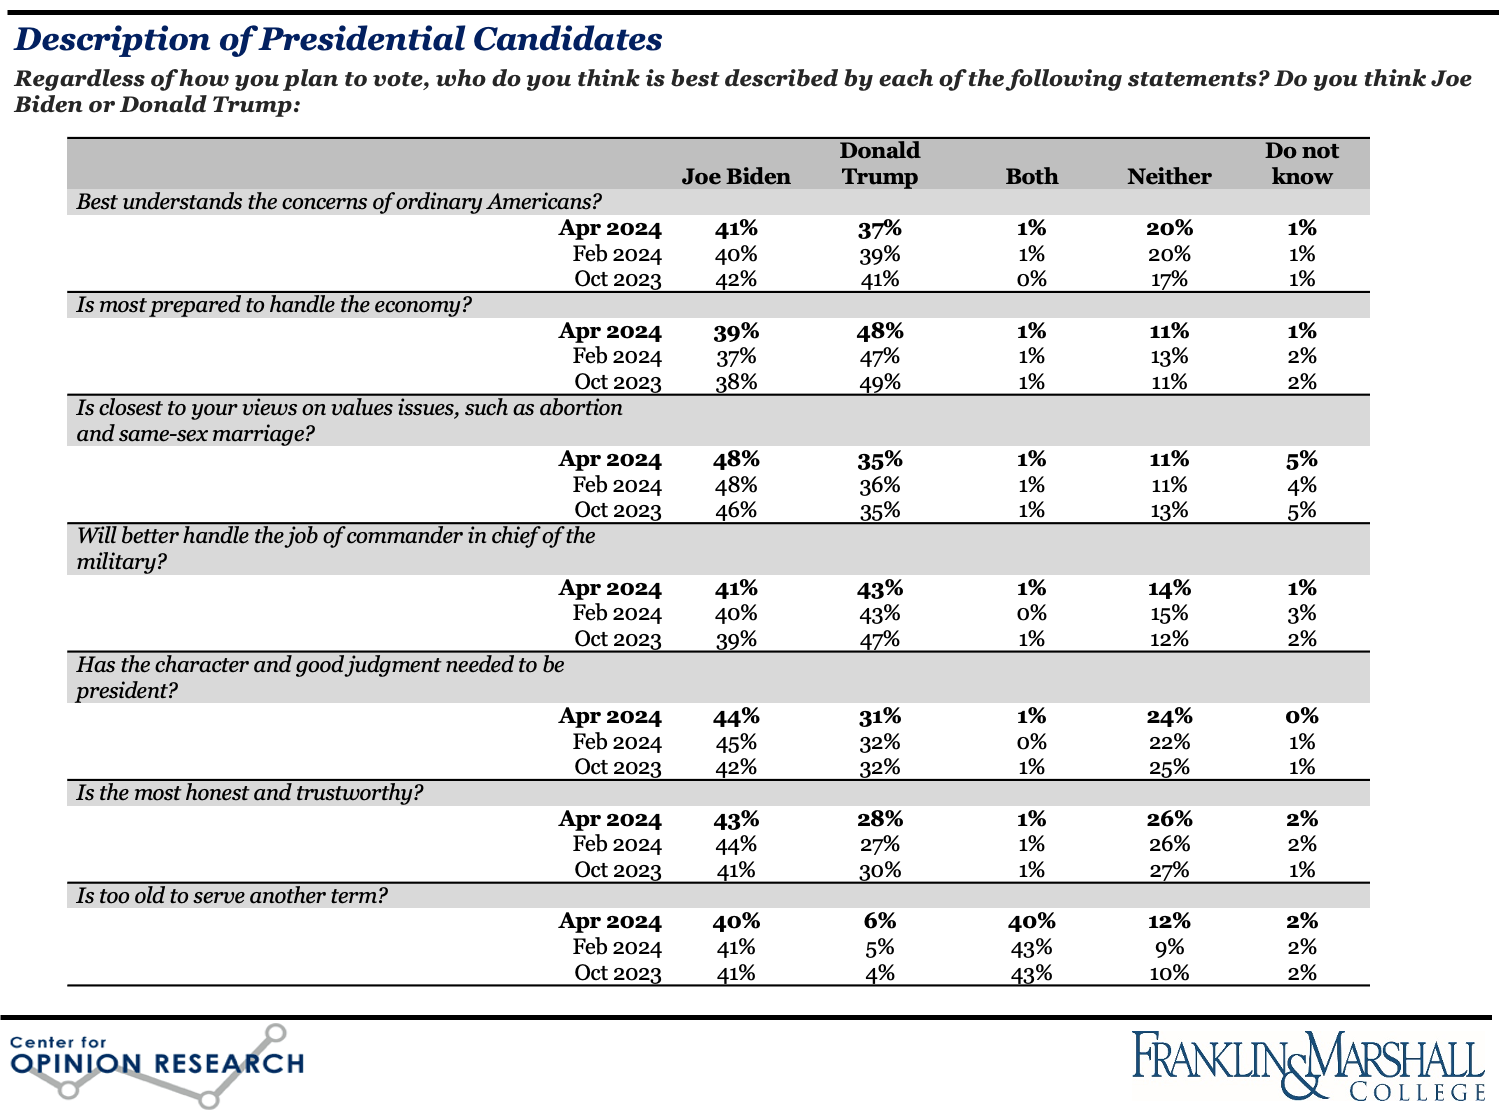 Figure 3. Table using F&M Poll data from April and February 2024 and October 2023 to show Pennsylvania voters' views on Biden and Trump's values, strengths, and characteristics. Which candidate is better prepared to handle the economy and the job of commander in chief, best understands ordinary Americans, is closer to their views on values issues, is the most honest, and has the character and good judgement to serve another term? Is either too old to serve again? 